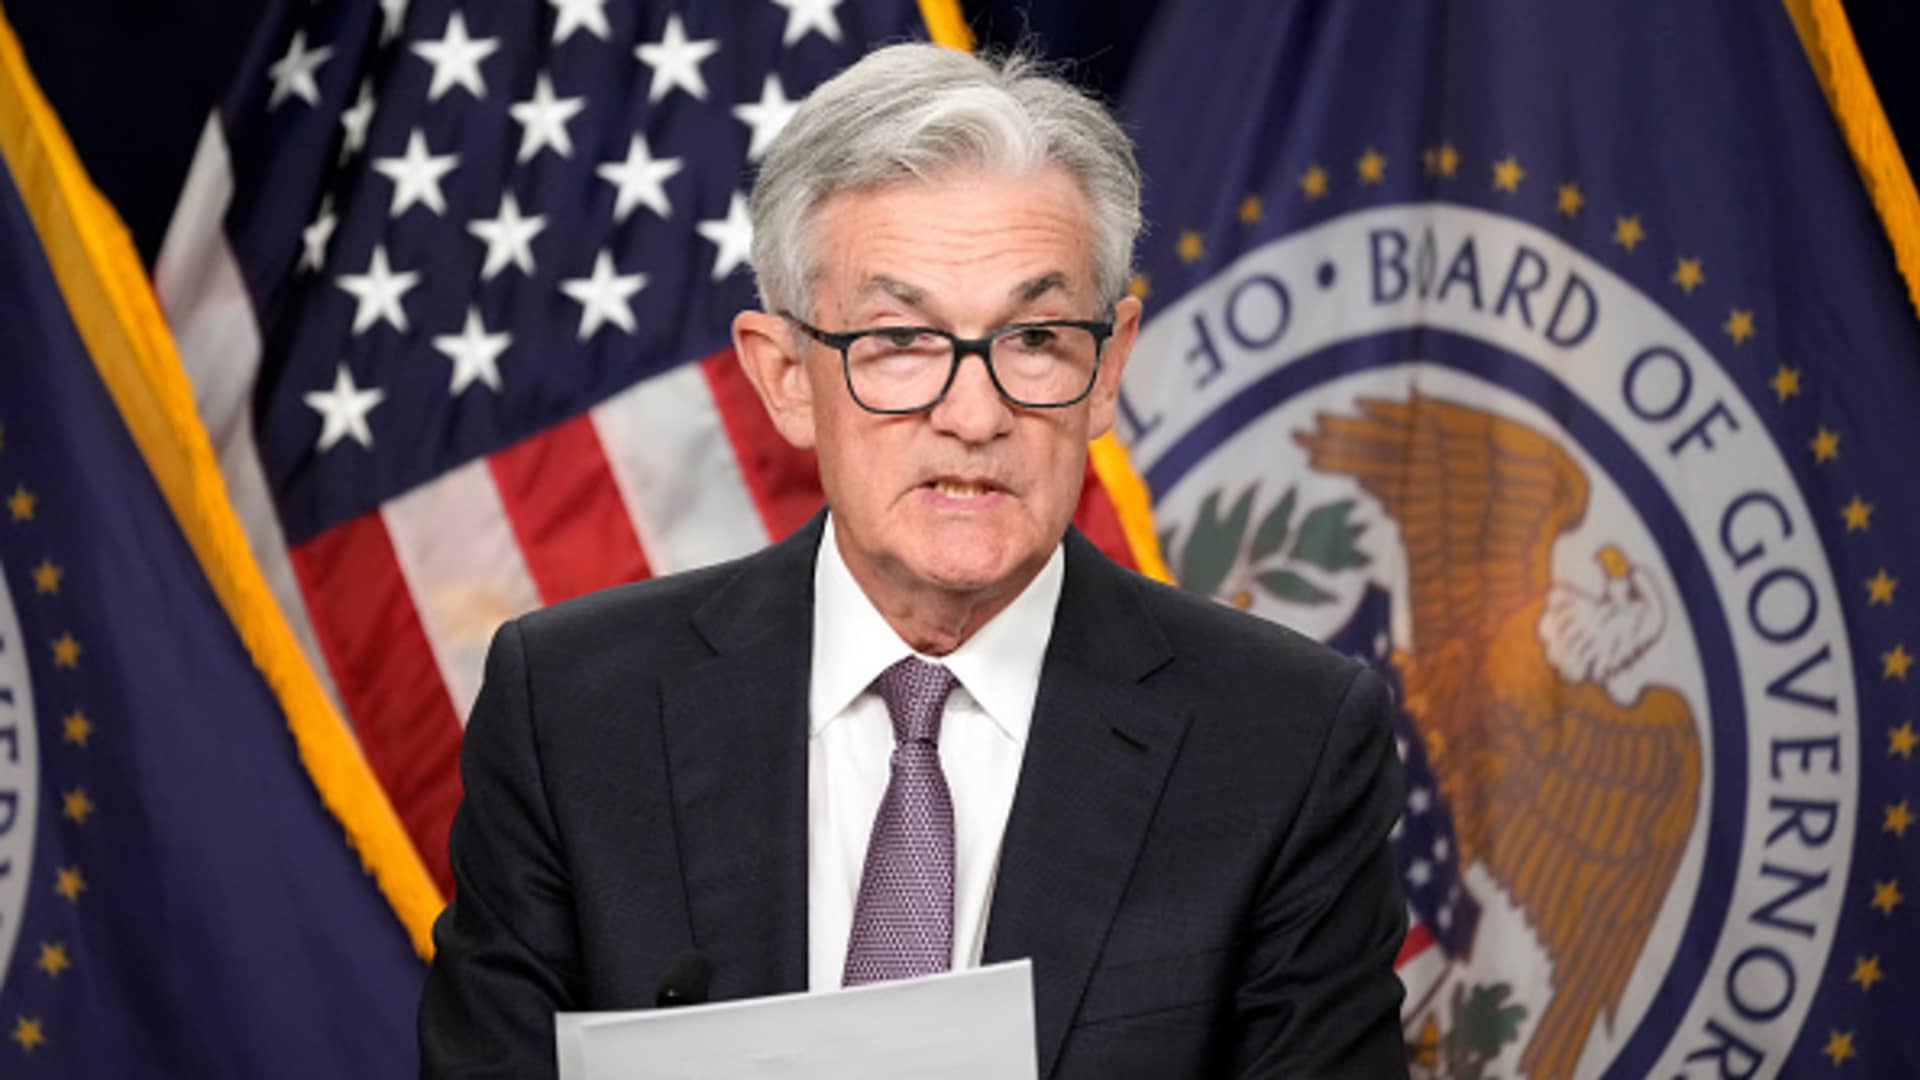 Fed officials expect higher rates to stay in place meeting minutes show – CNBC